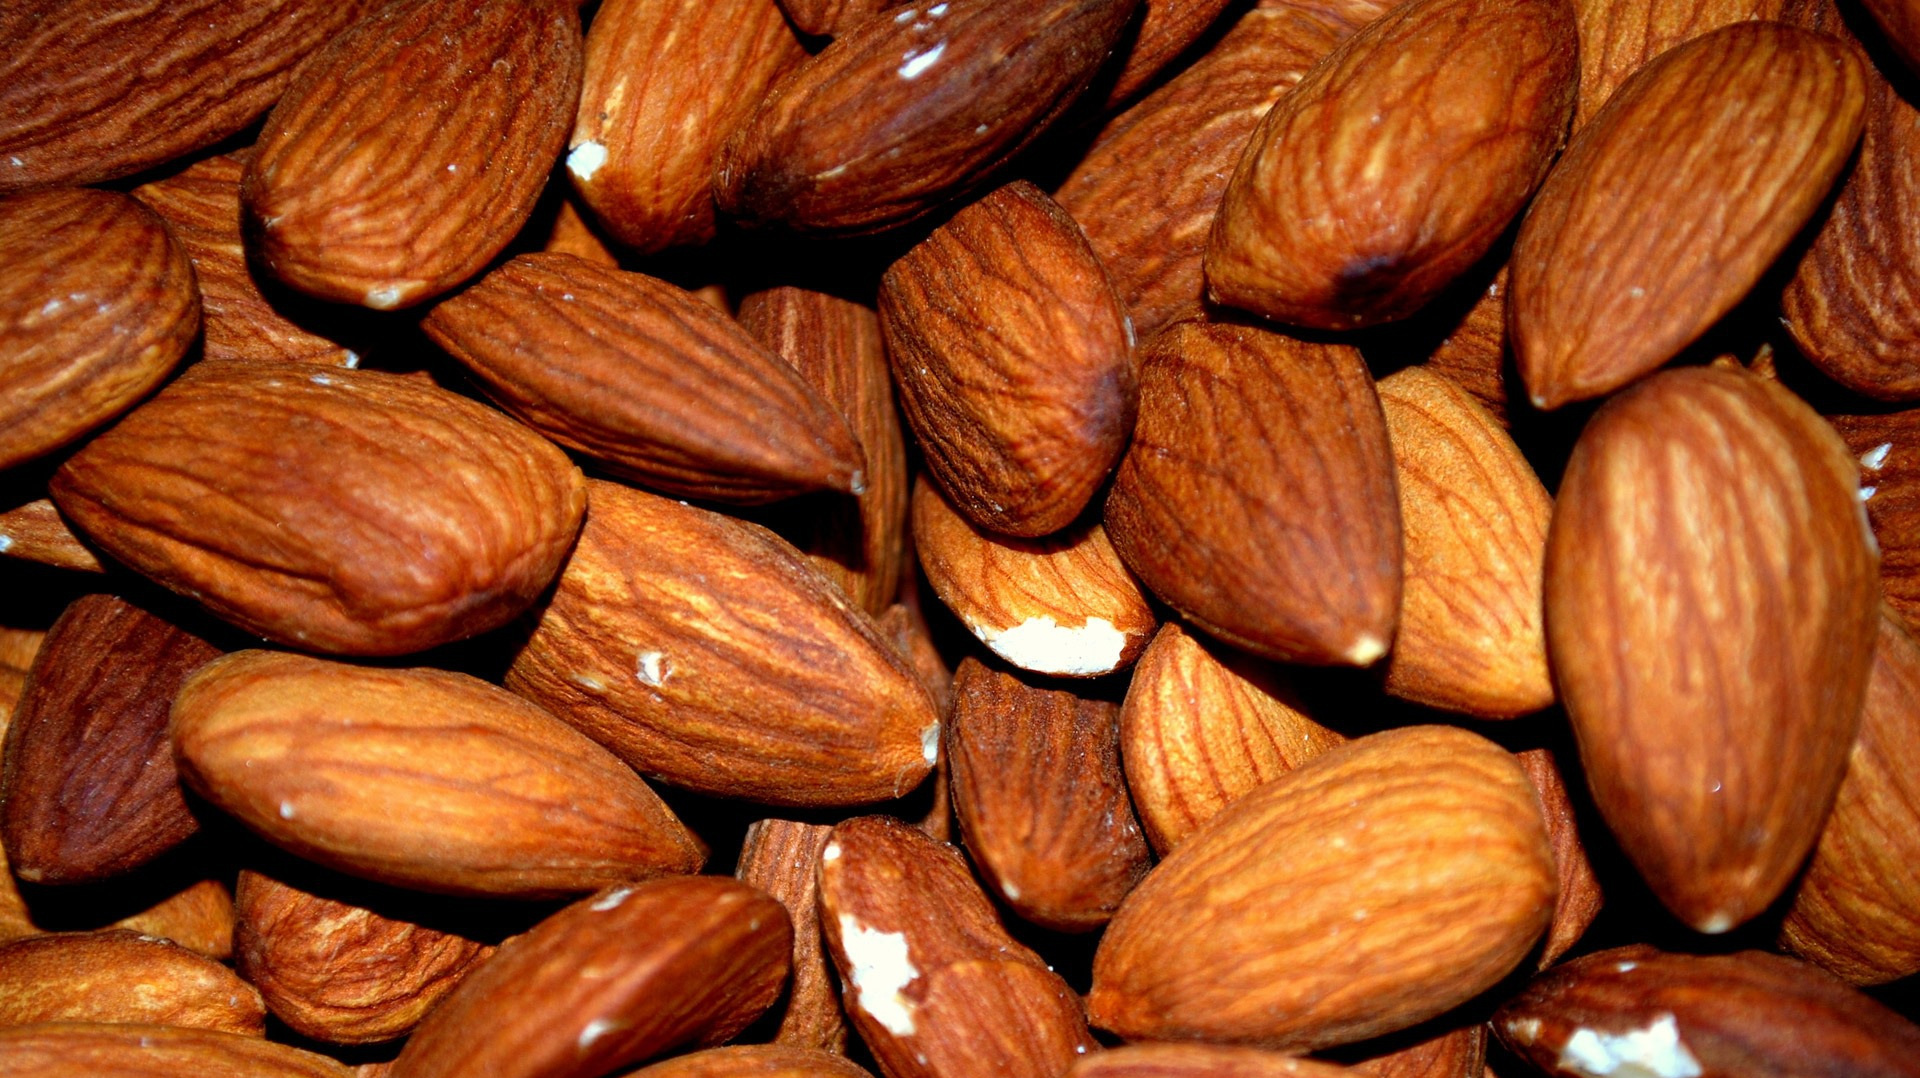 Almonds used to make Sweet Almond Carrier Oil